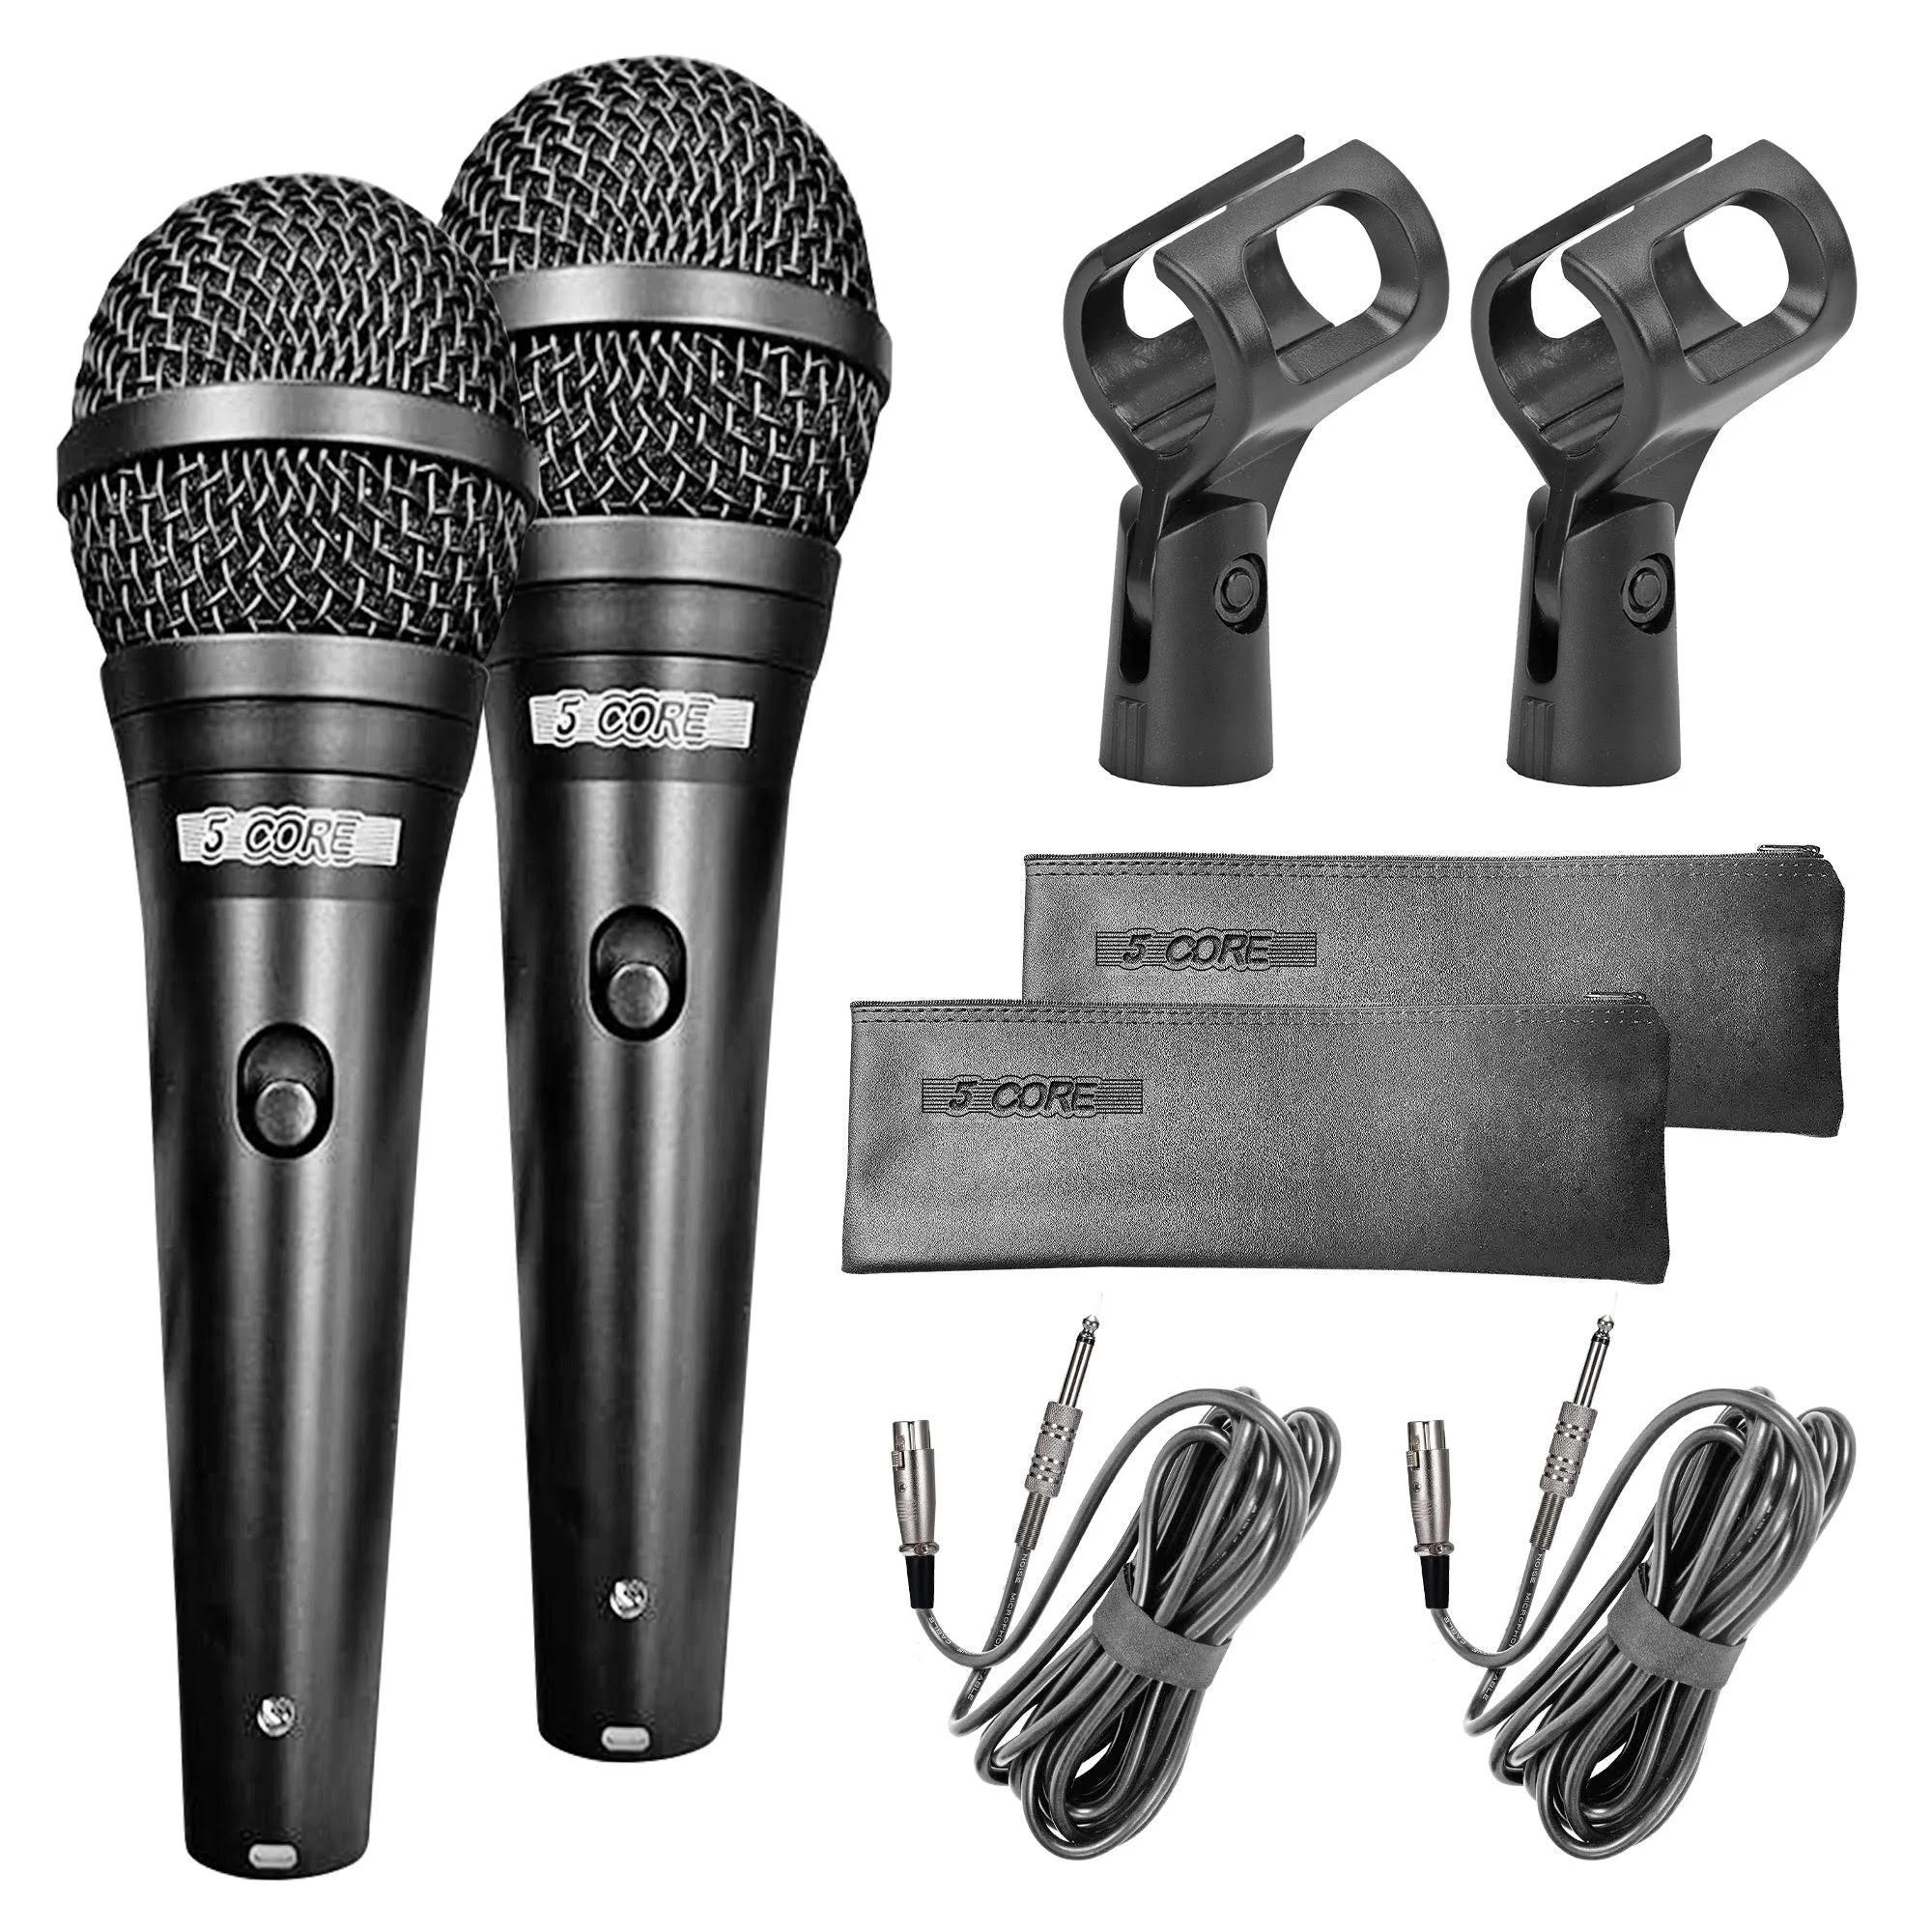 Unidirectional Handheld XLR Microphone Online for Cinema-Quality Music | Image